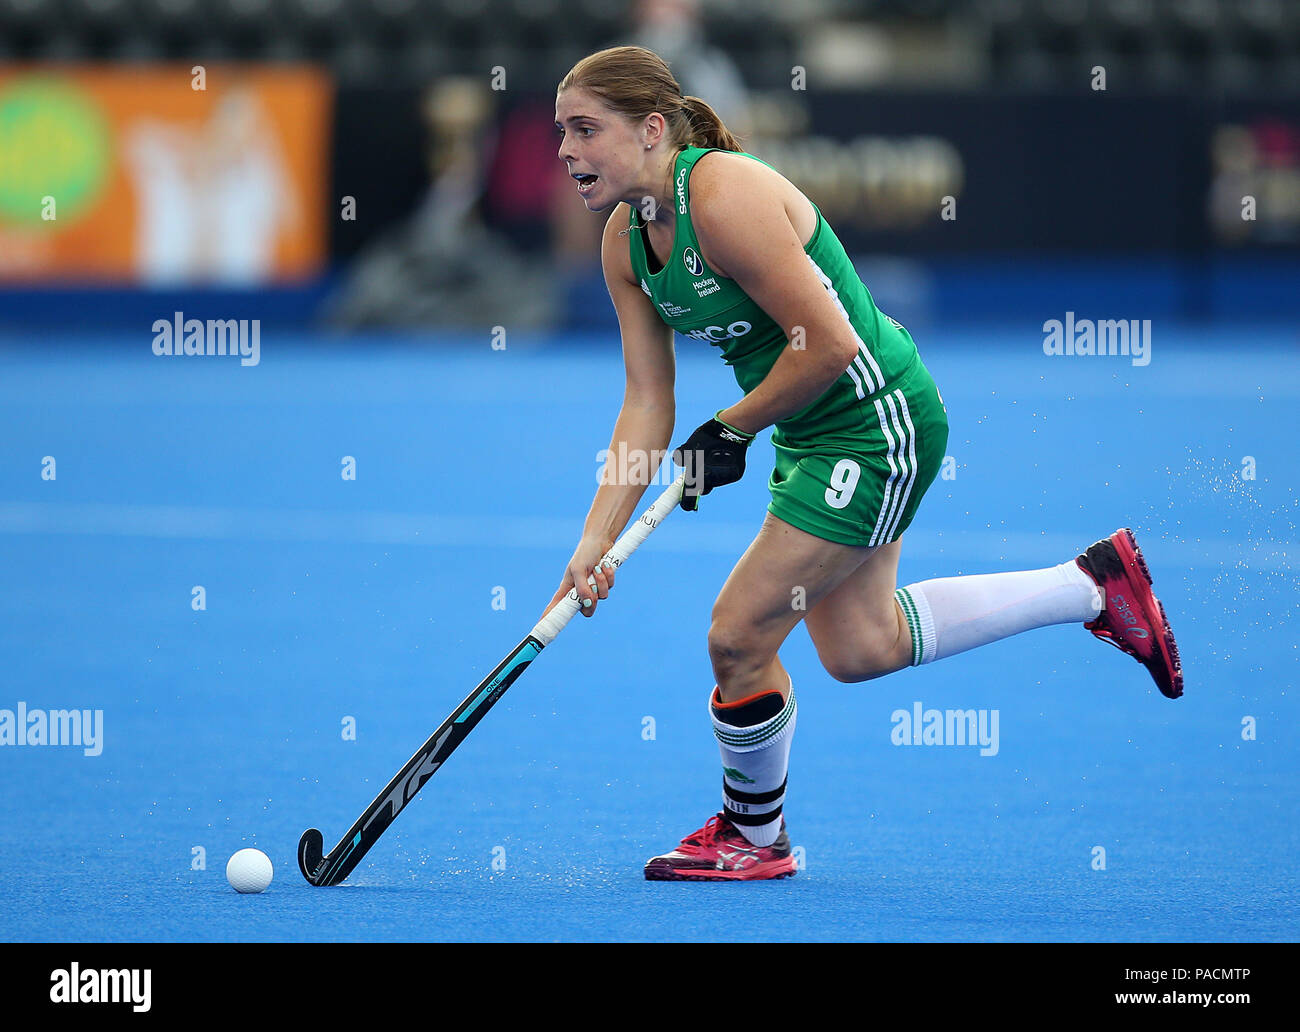 Ireland's Kathryn Mullan in action during the national anthem during the Vitality Women's Hockey World Cup pool B match at The Lee Valley Hockey and Tennis Centre, London. Stock Photo